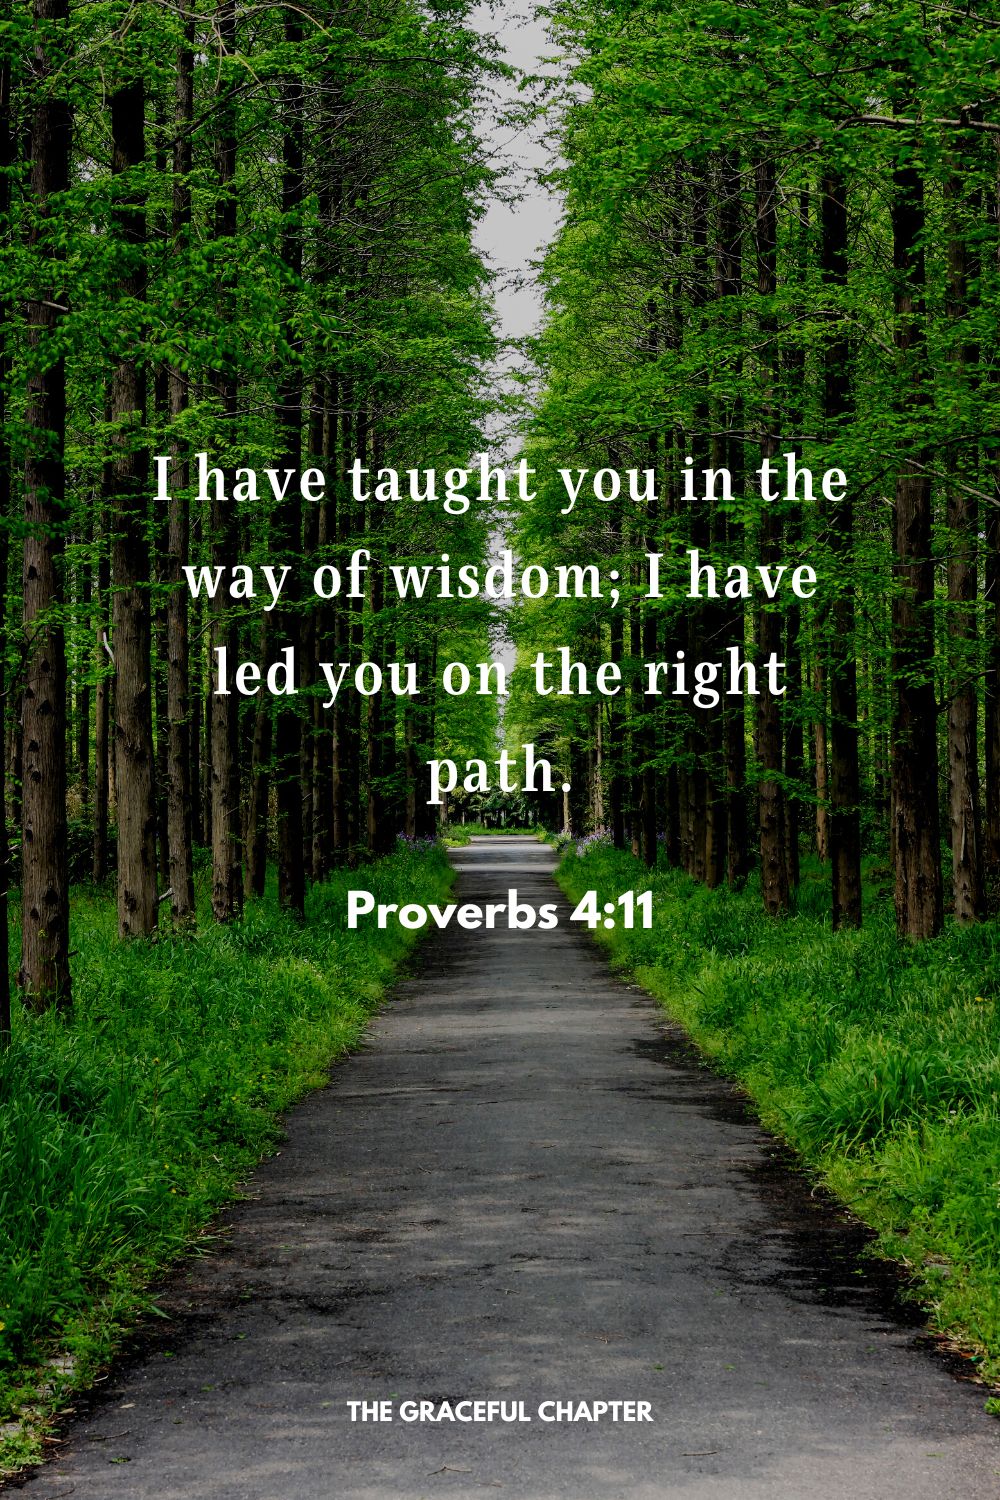 I have taught you in the way of wisdom; I have led you on the right path. Proverbs 4:11